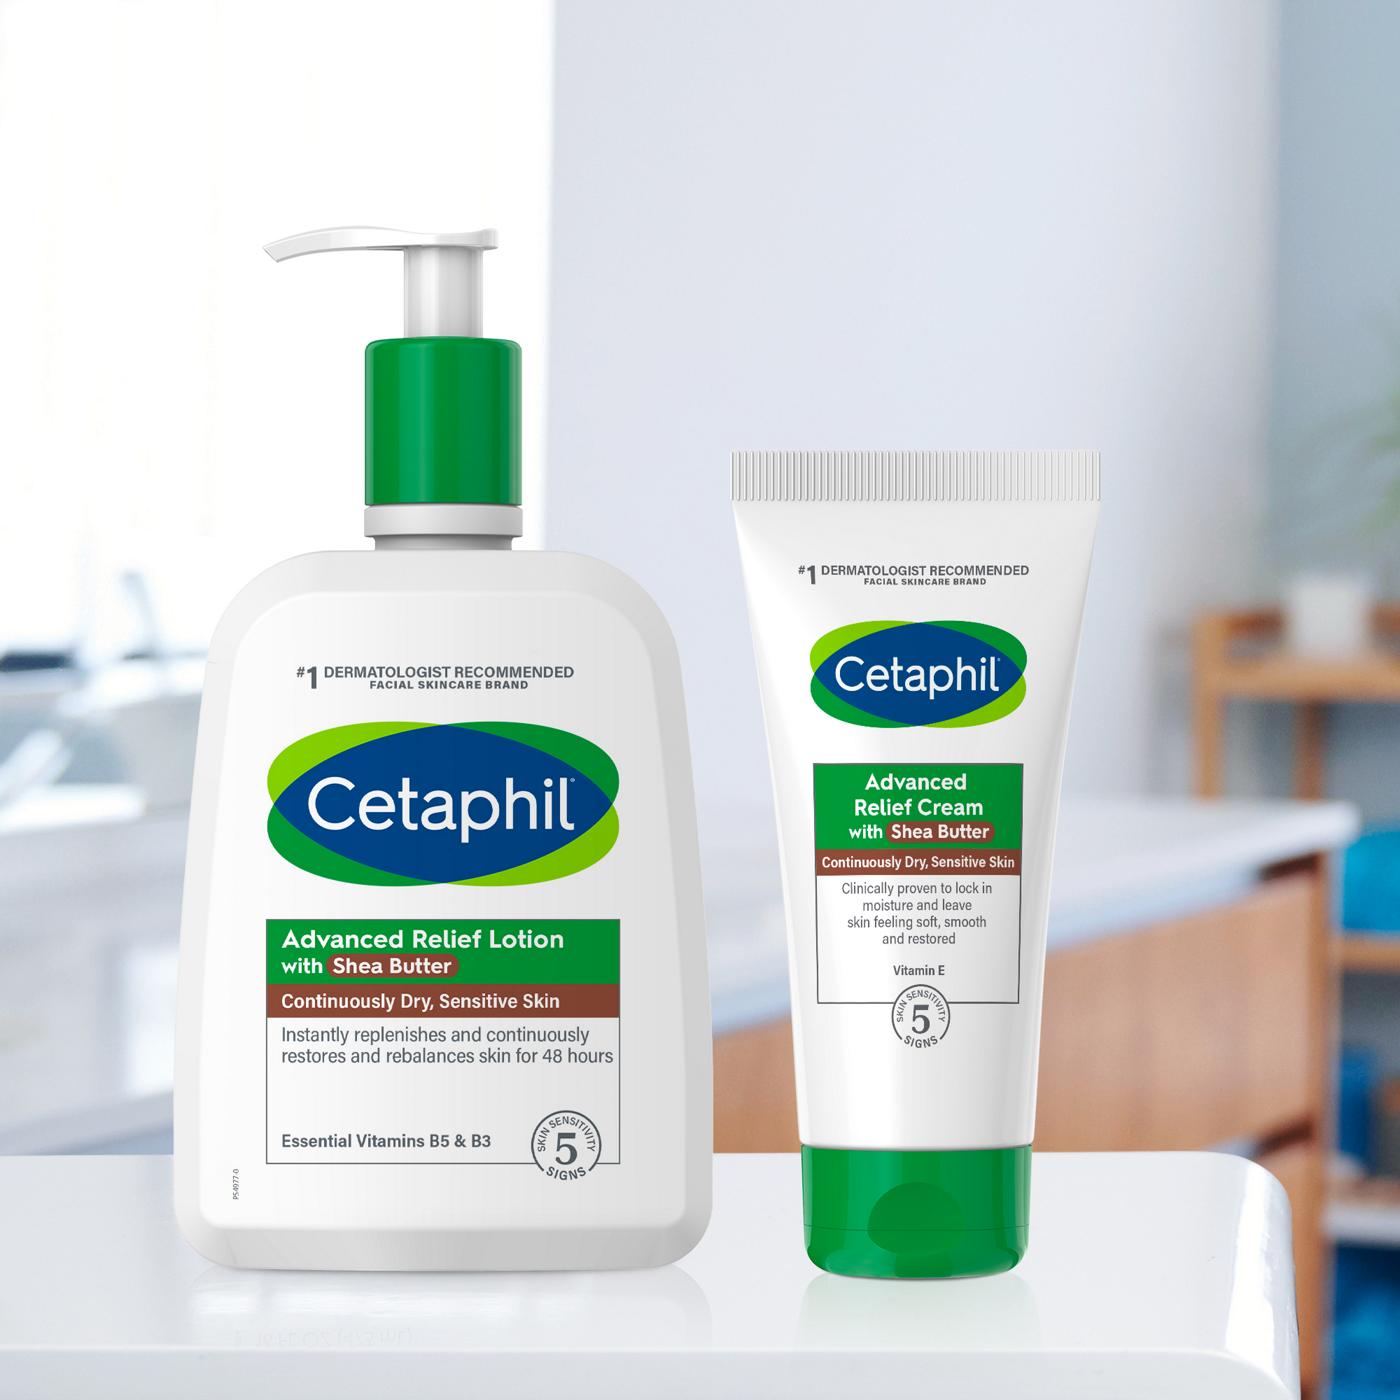 Cetaphil Advanced Relief Lotion; image 7 of 10